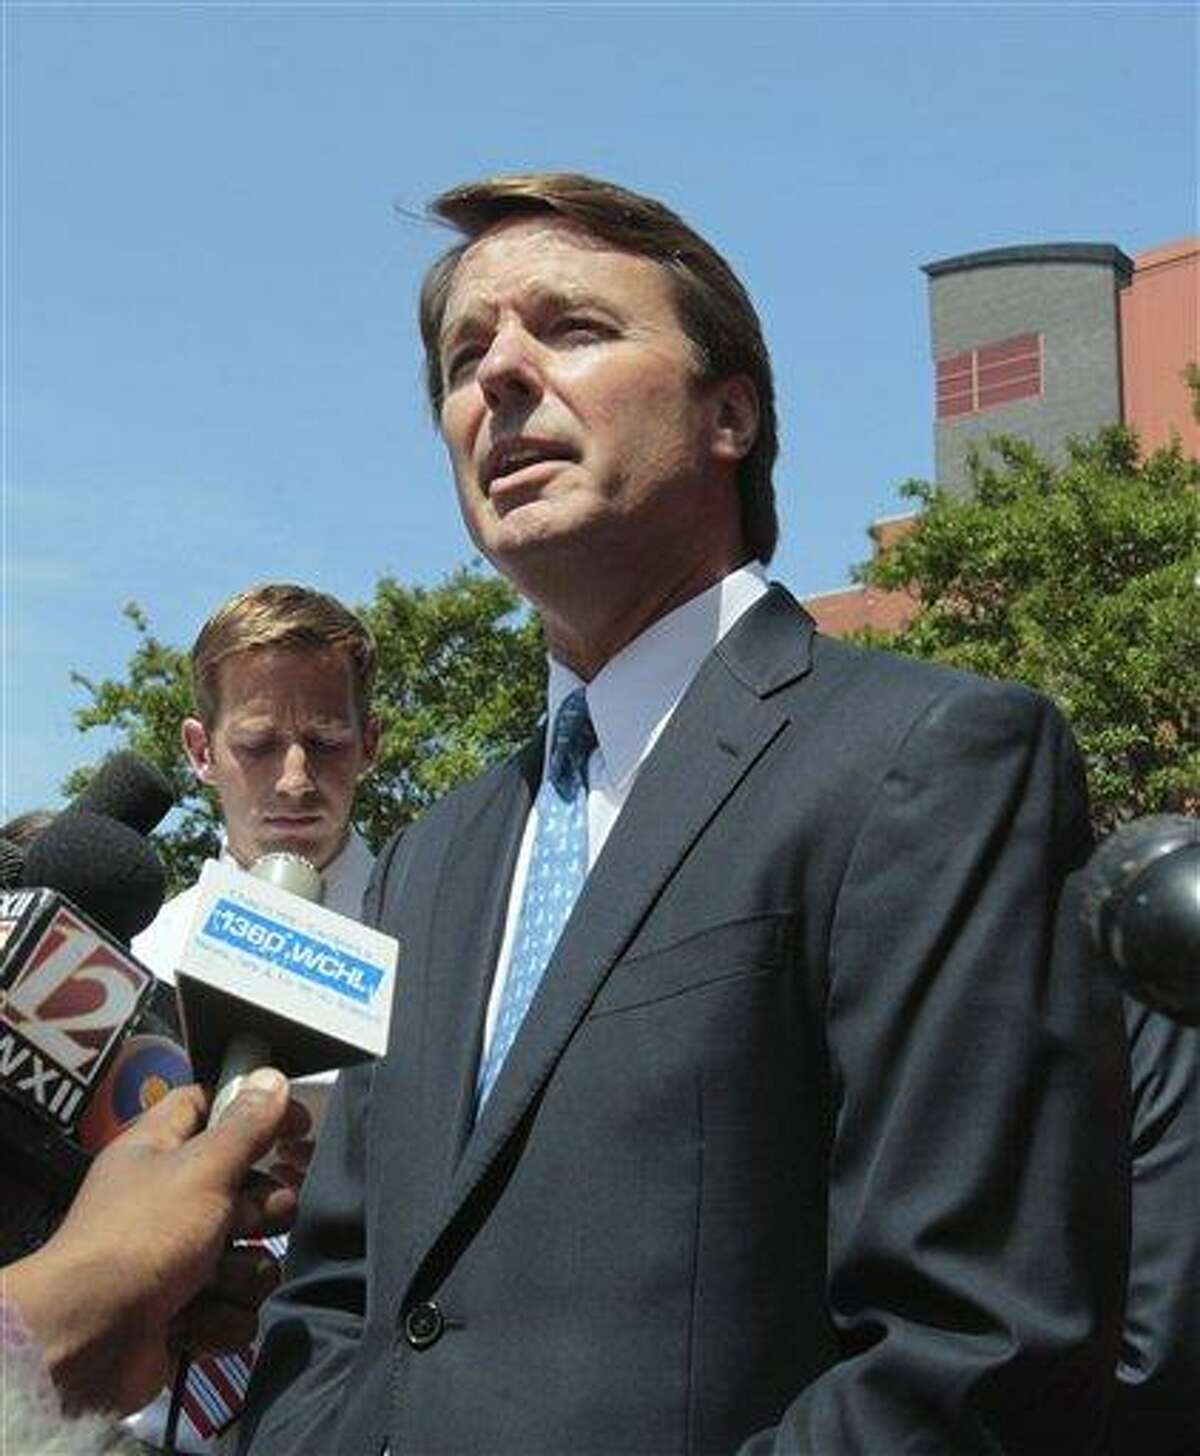 FILE - In this June 3, 2011 file photo, former presidential candidate John Edwards outside federal court appearance in Winston-Salem, N.C. Prosecutors have obtained emails between John Edwards and a former aide to use as evidence at trial that he knew about payments to his pregnant mistress even while he was publicly denying it, people familiar with the case told The Associated Press on Monday. (AP Photo/Gerry Broome, File)